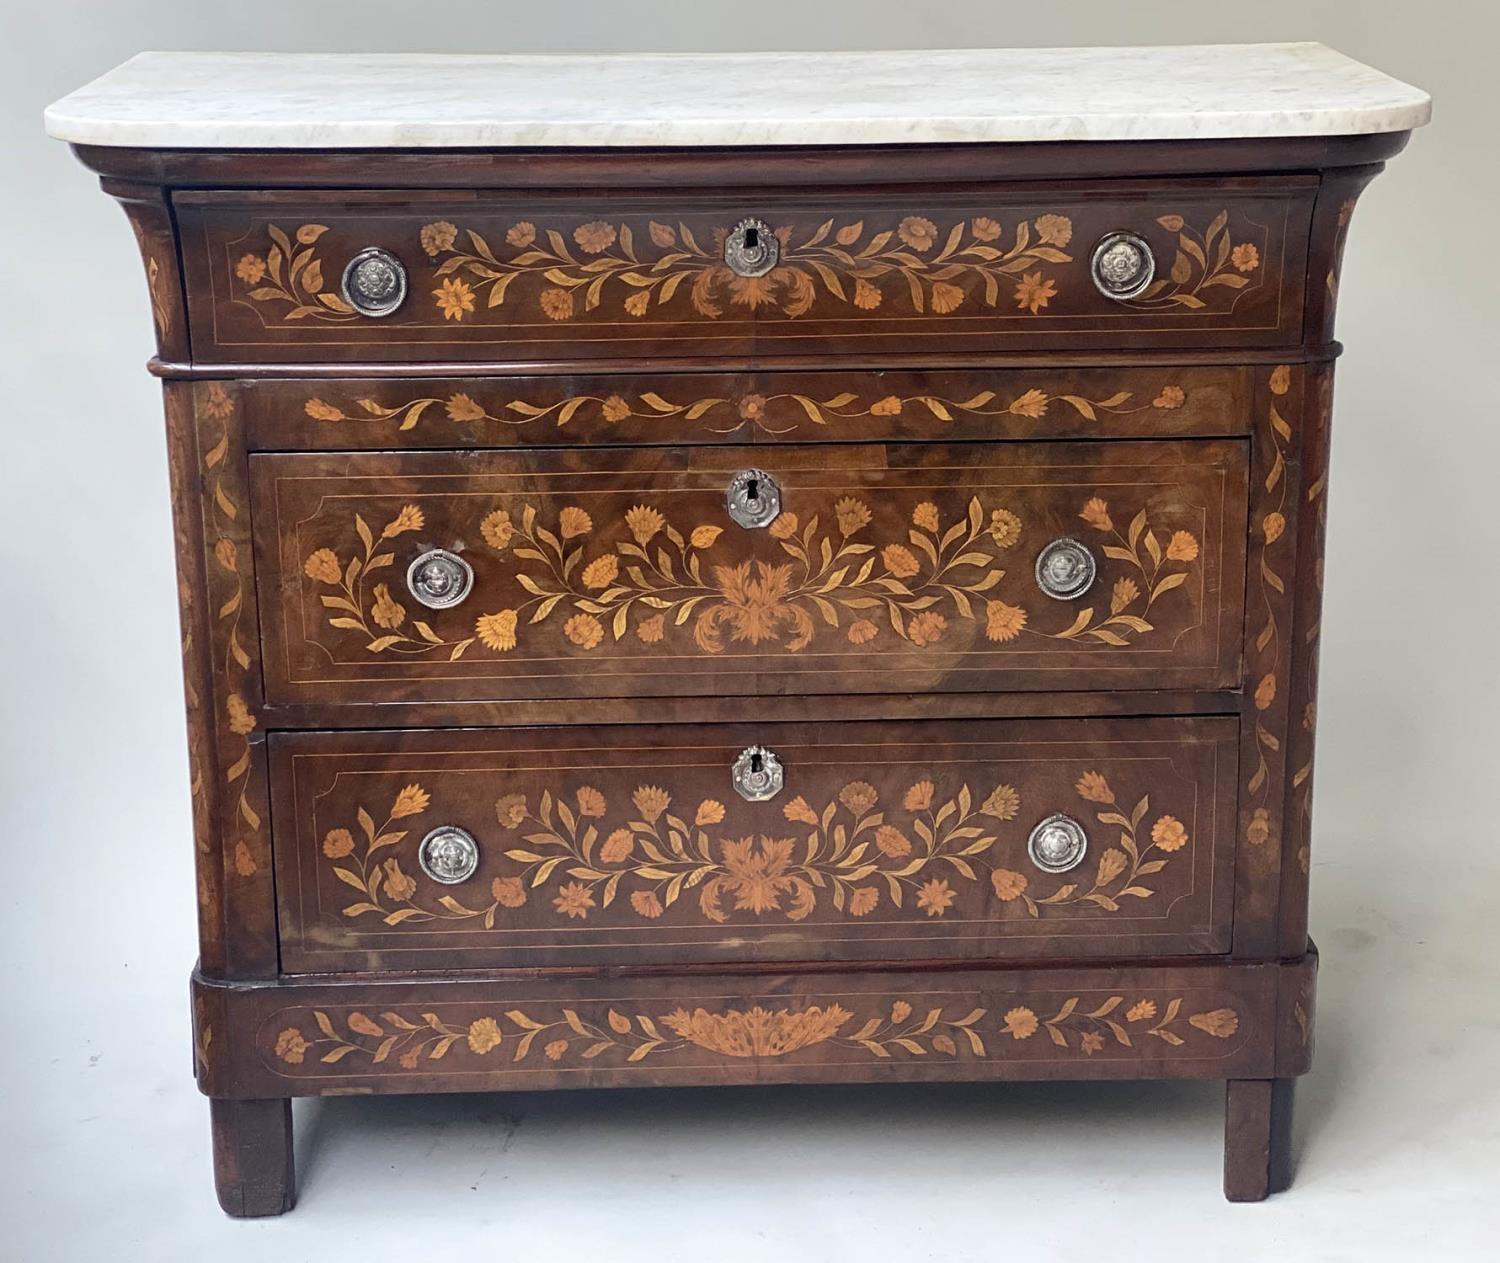 DUTCH COMMODE, 19th century mahogany and foliate satinwood inlaid with variegated white marble and